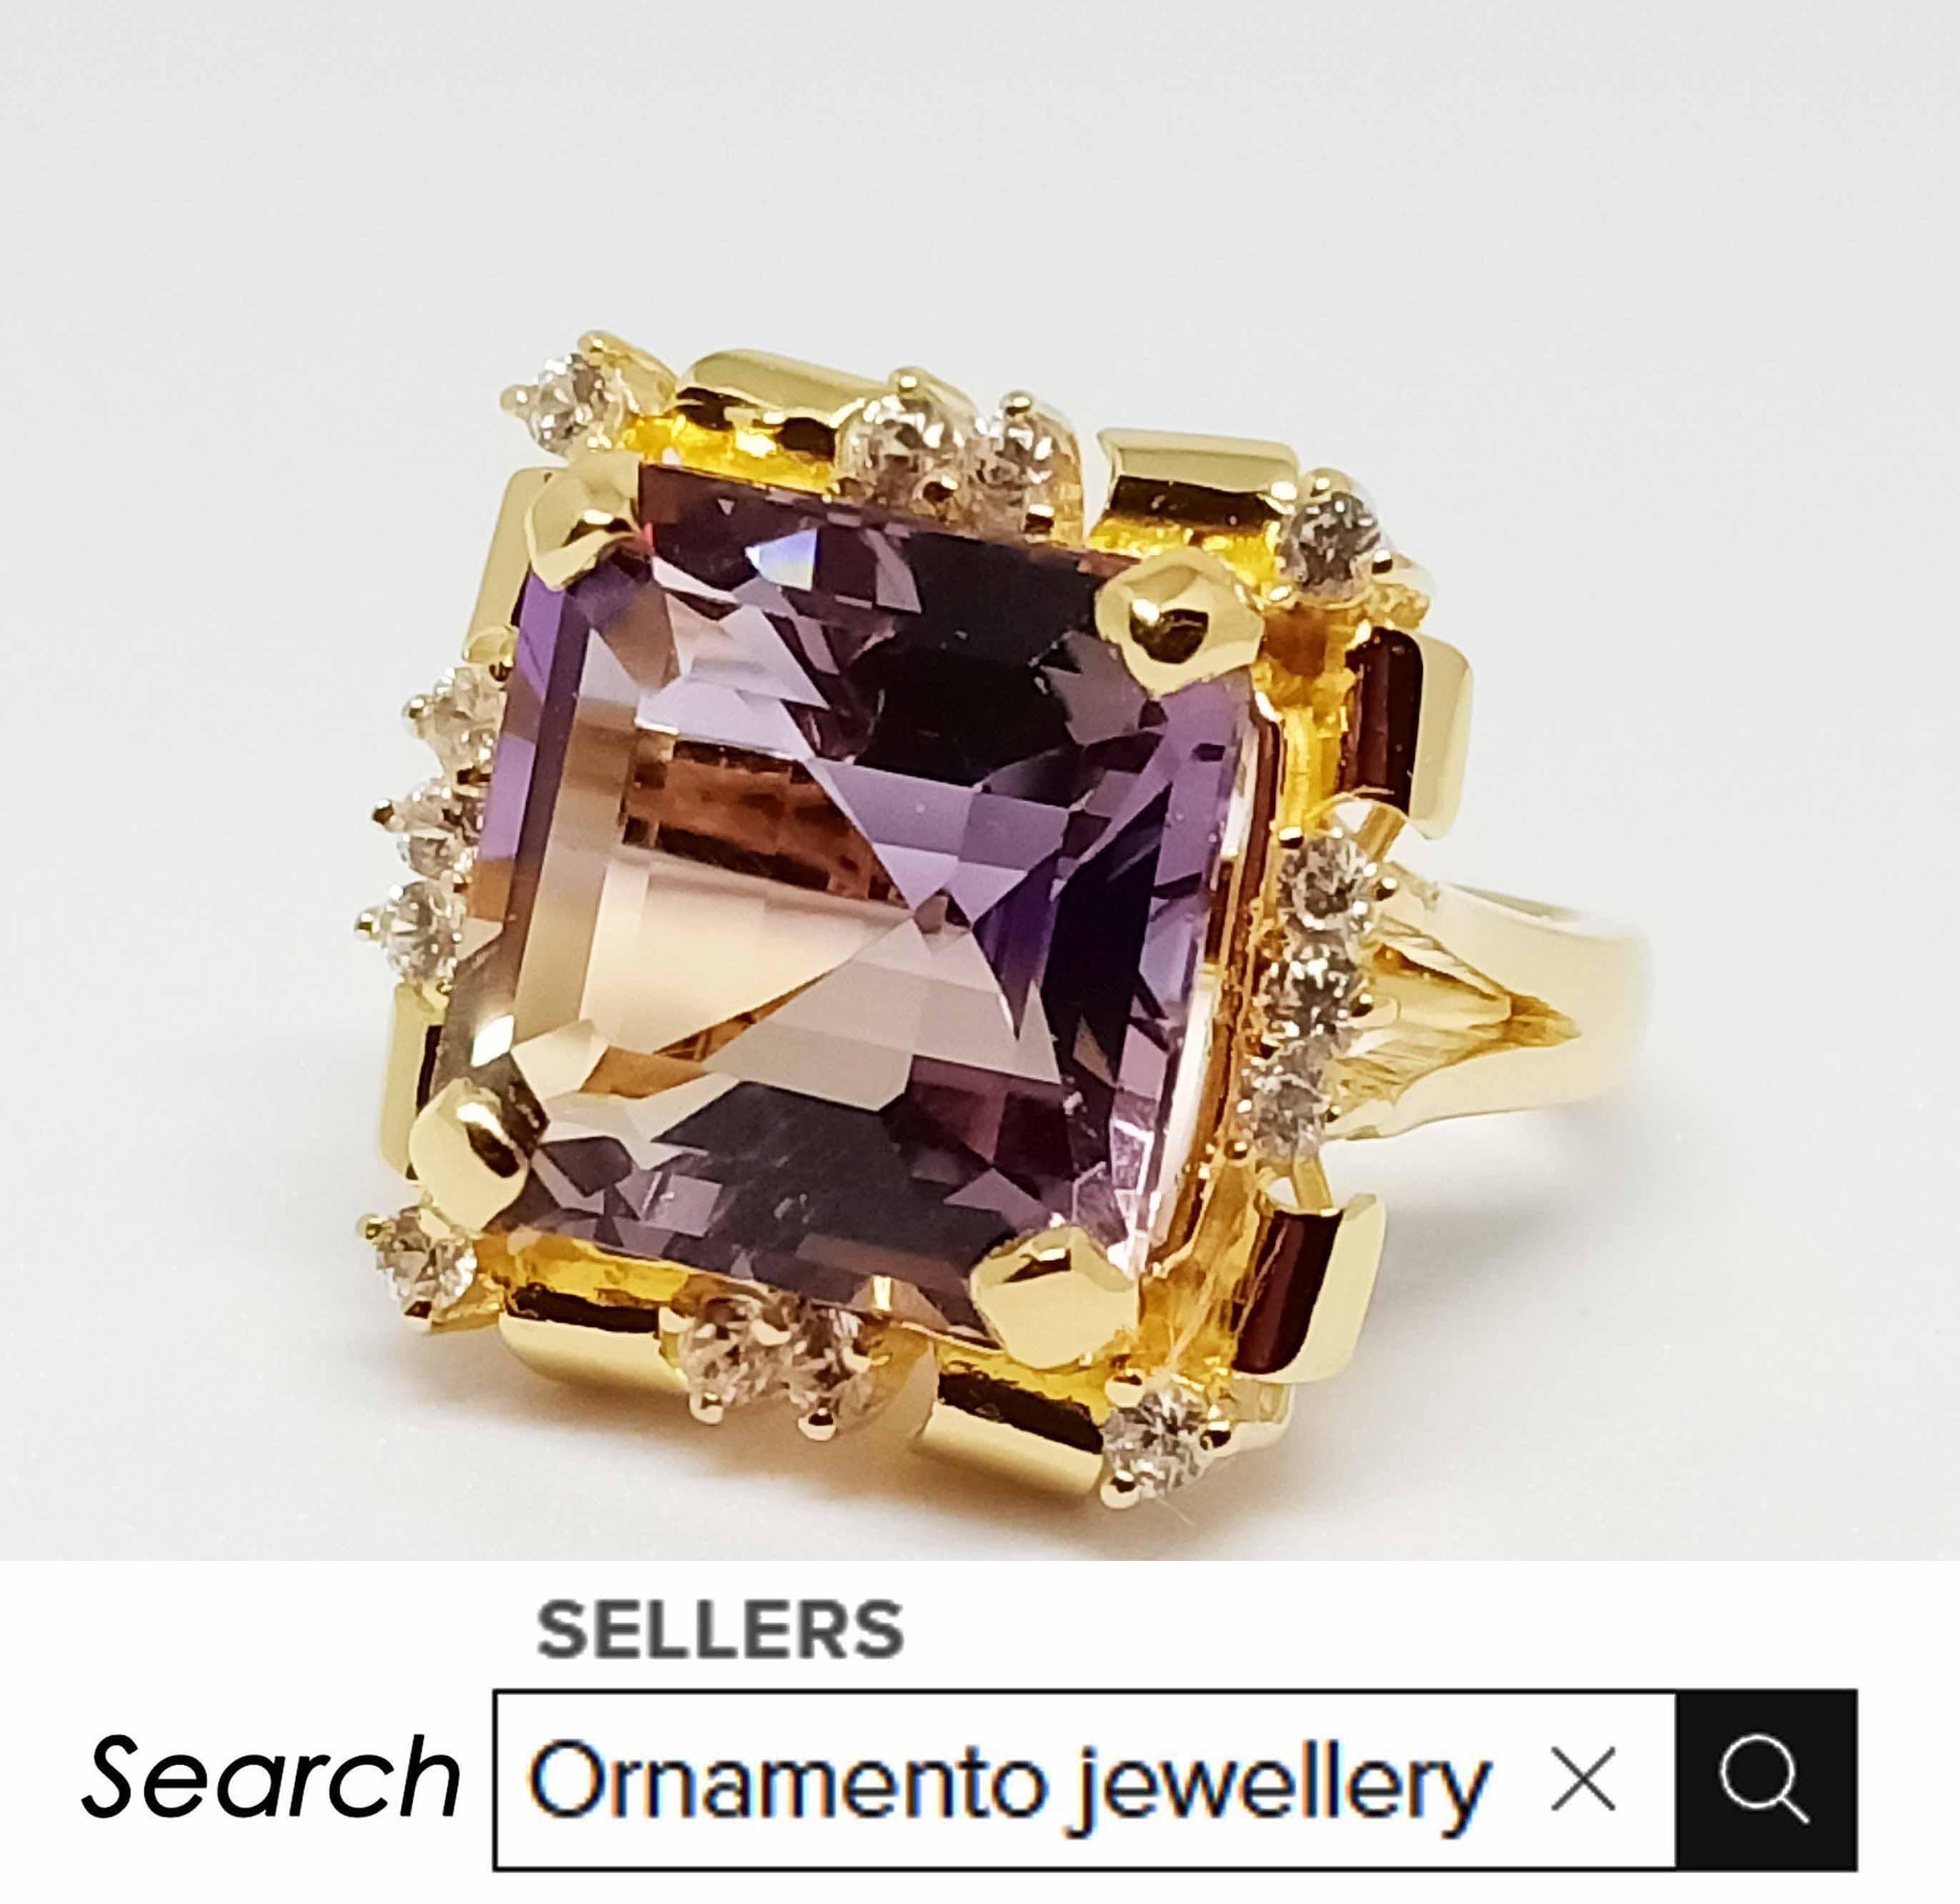 Octagon Cut (Big ring)Ametrine Ring(12.79cts) sterling silver on 18K Gold Plated. For Sale